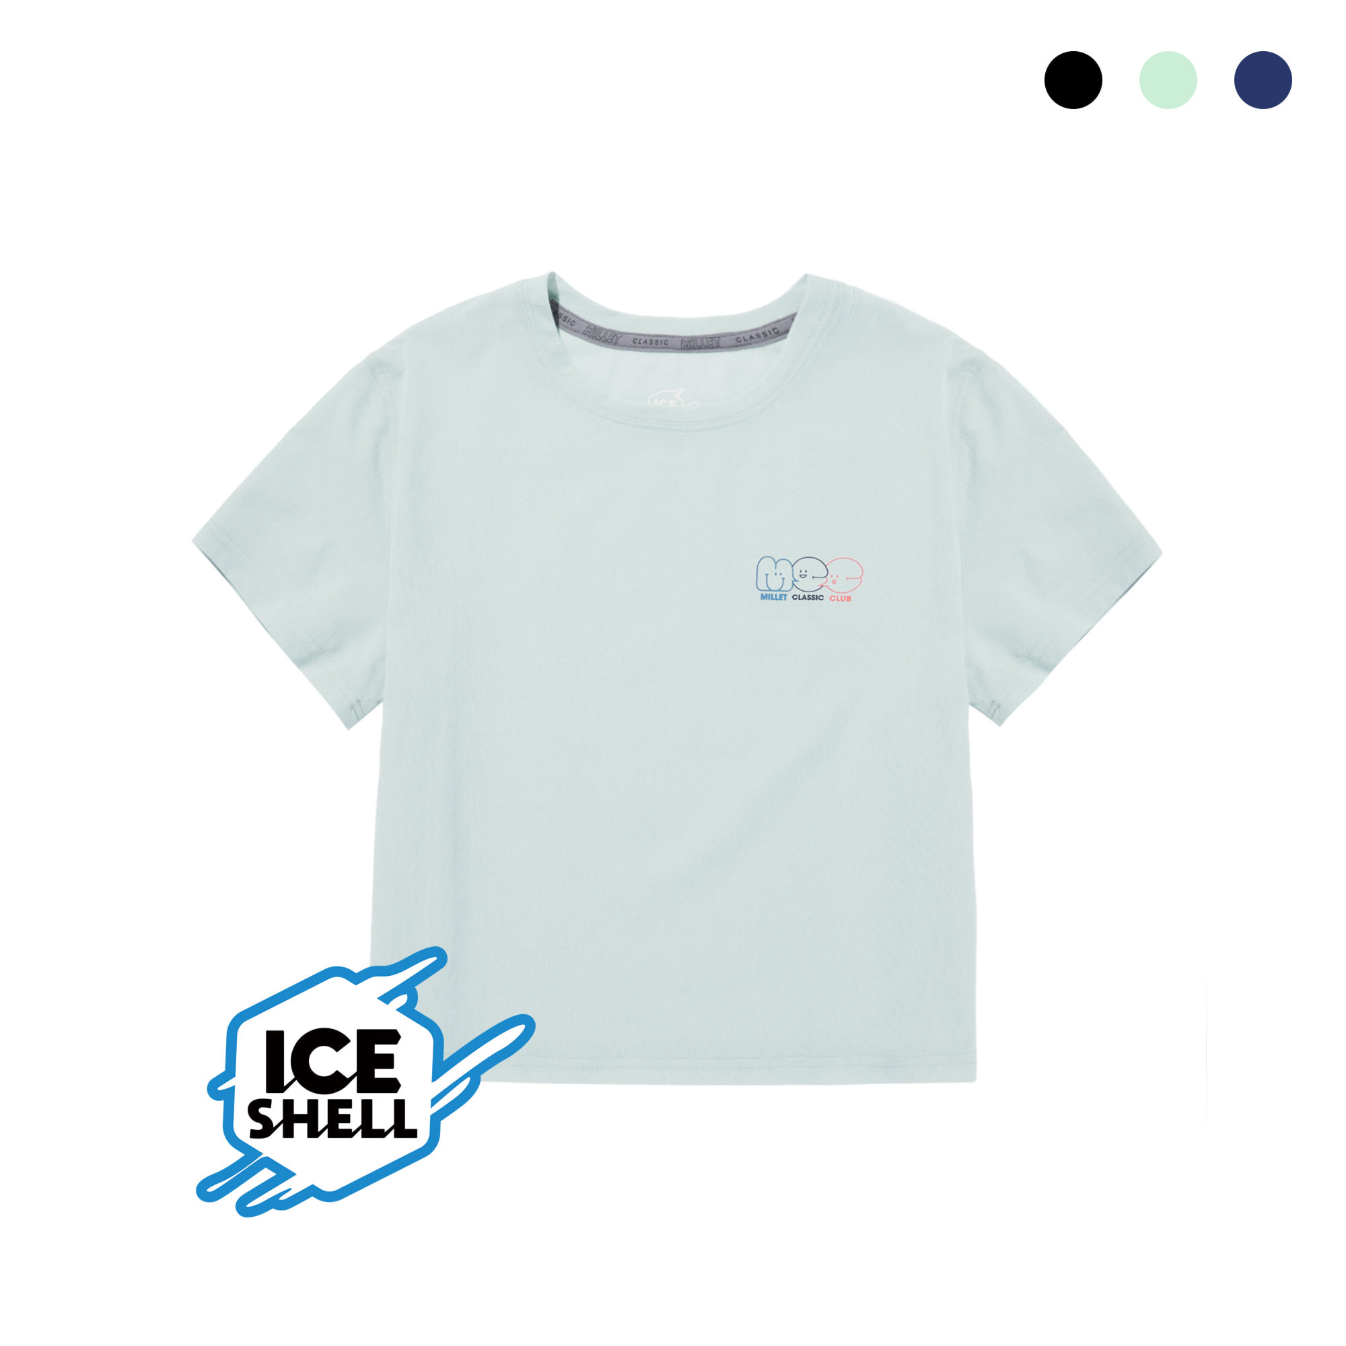 MCC GRAPHIC ICE SHELL CROP T-SHIRTS